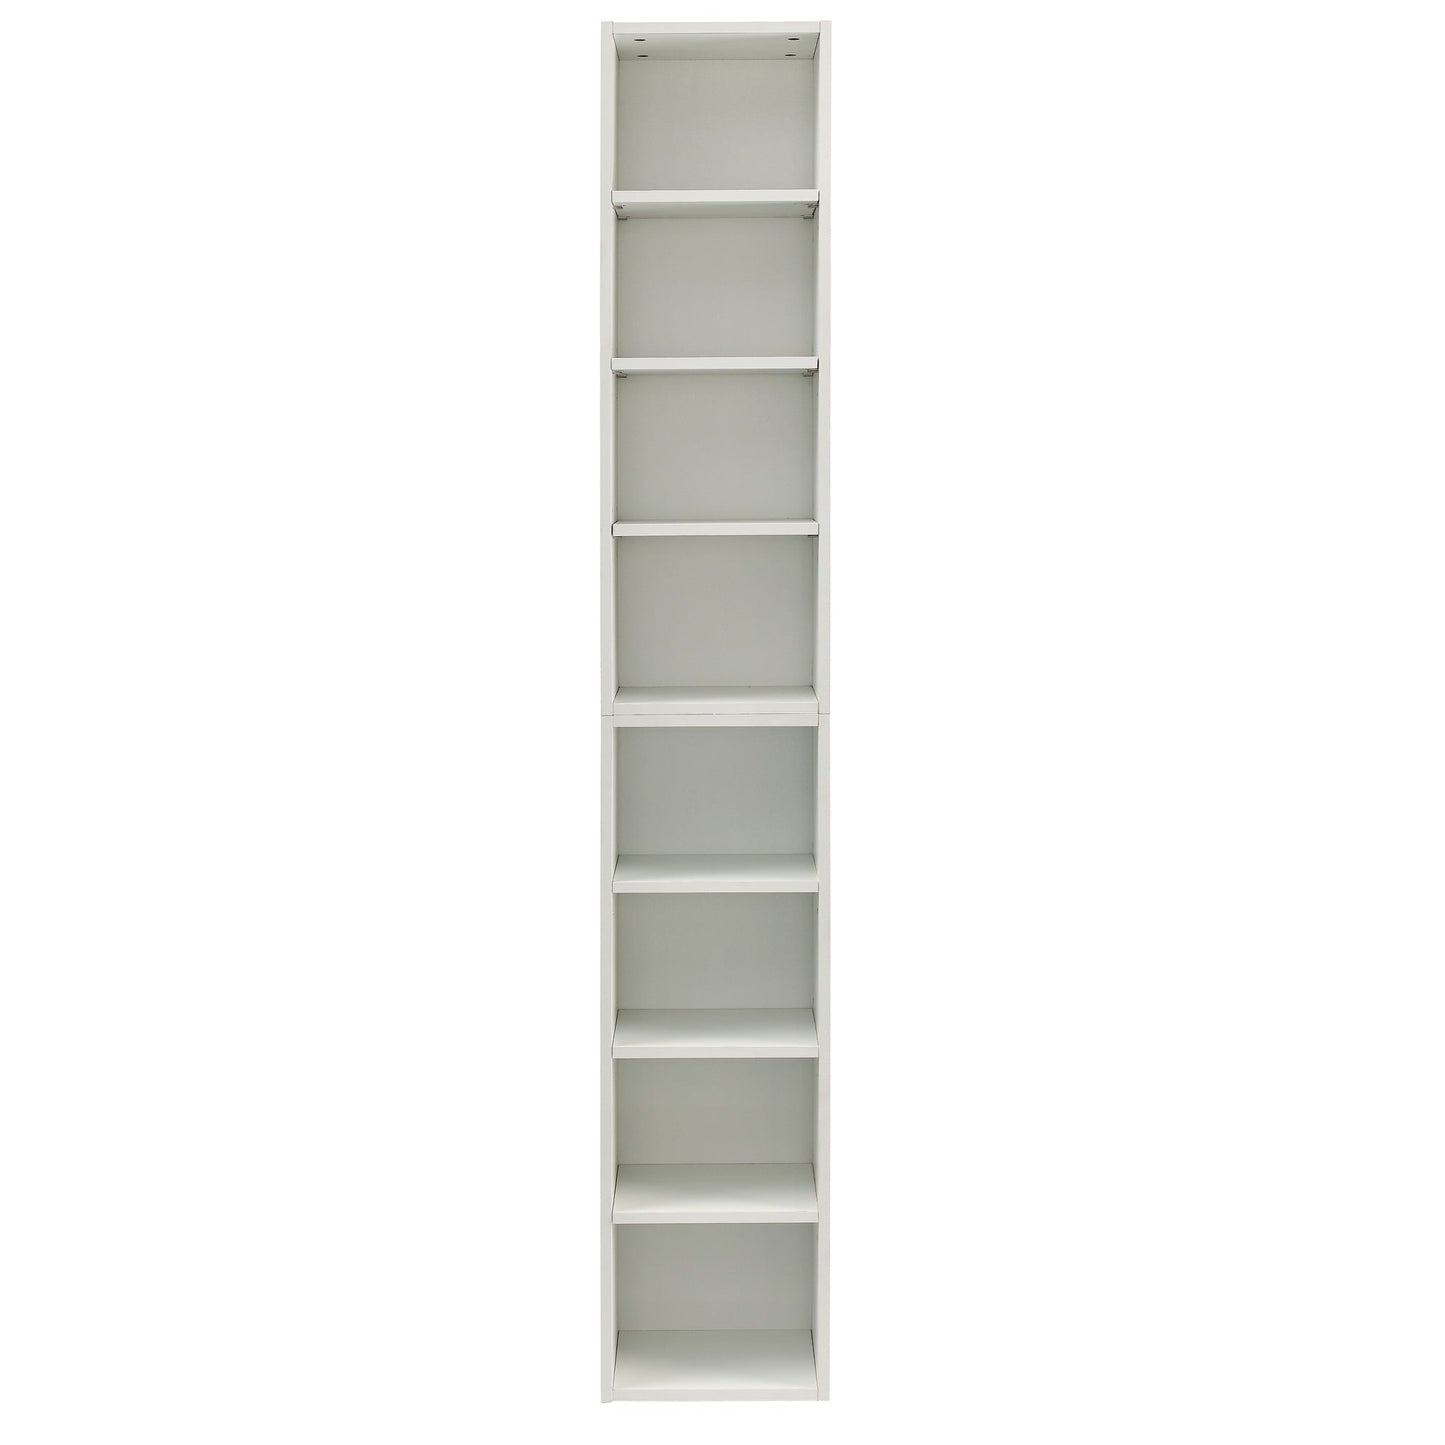 8-Tier Media Tower Rack, CD DVD Slim Storage Cabinet with Adjustable Shelves, Tall Narrow Bookcase Display Bookshelf for Home Office,Multi-functional double-decker bookcase